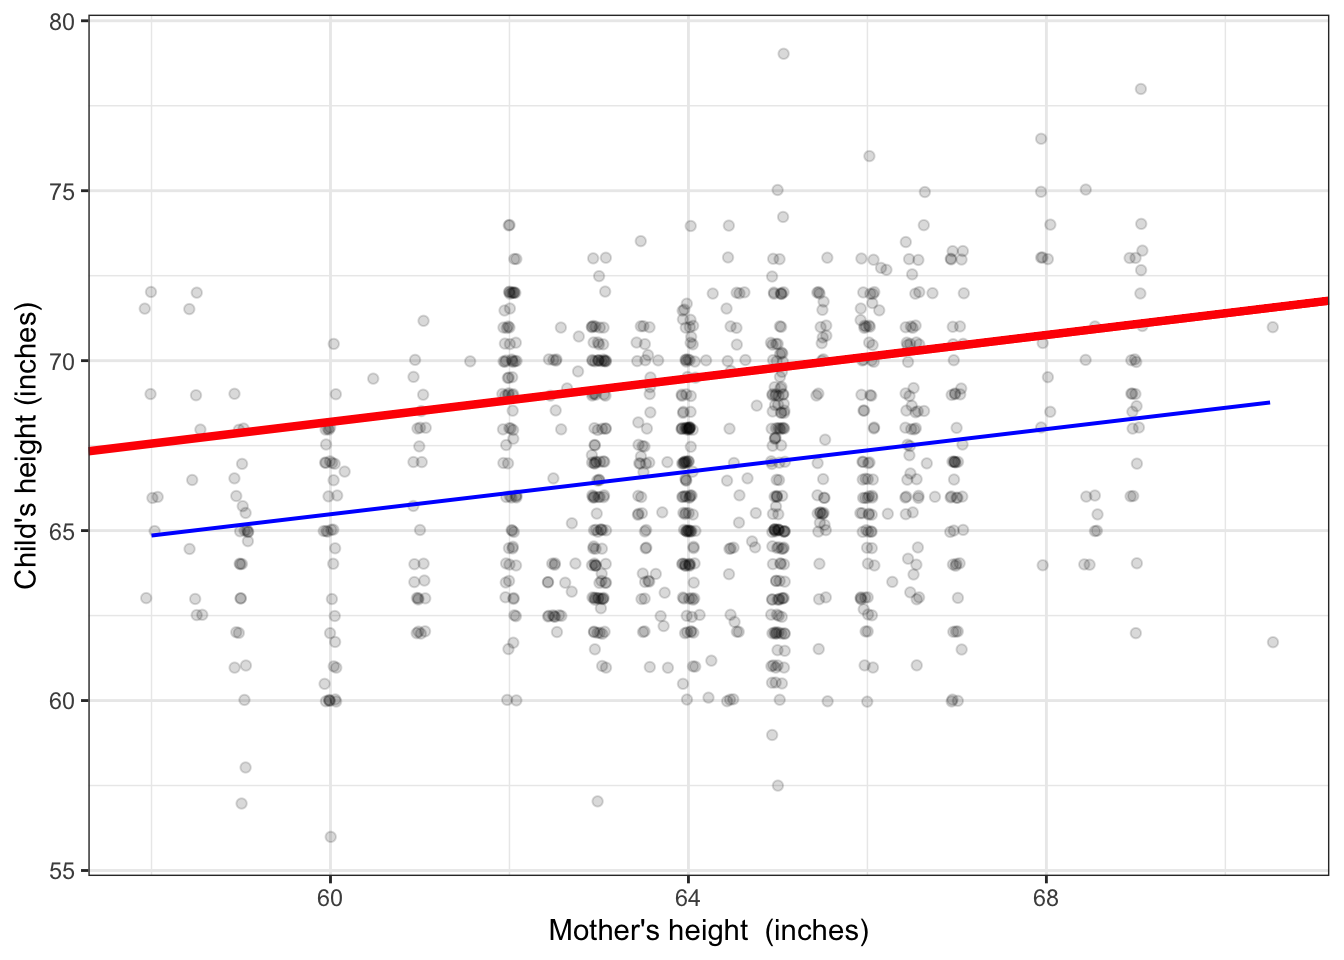 Figure 4.3: The function in red is a bad match to the data. It strays from the data at the extremes. The blue function has the same form -- a straight line -- but is a legitimate match to the data.